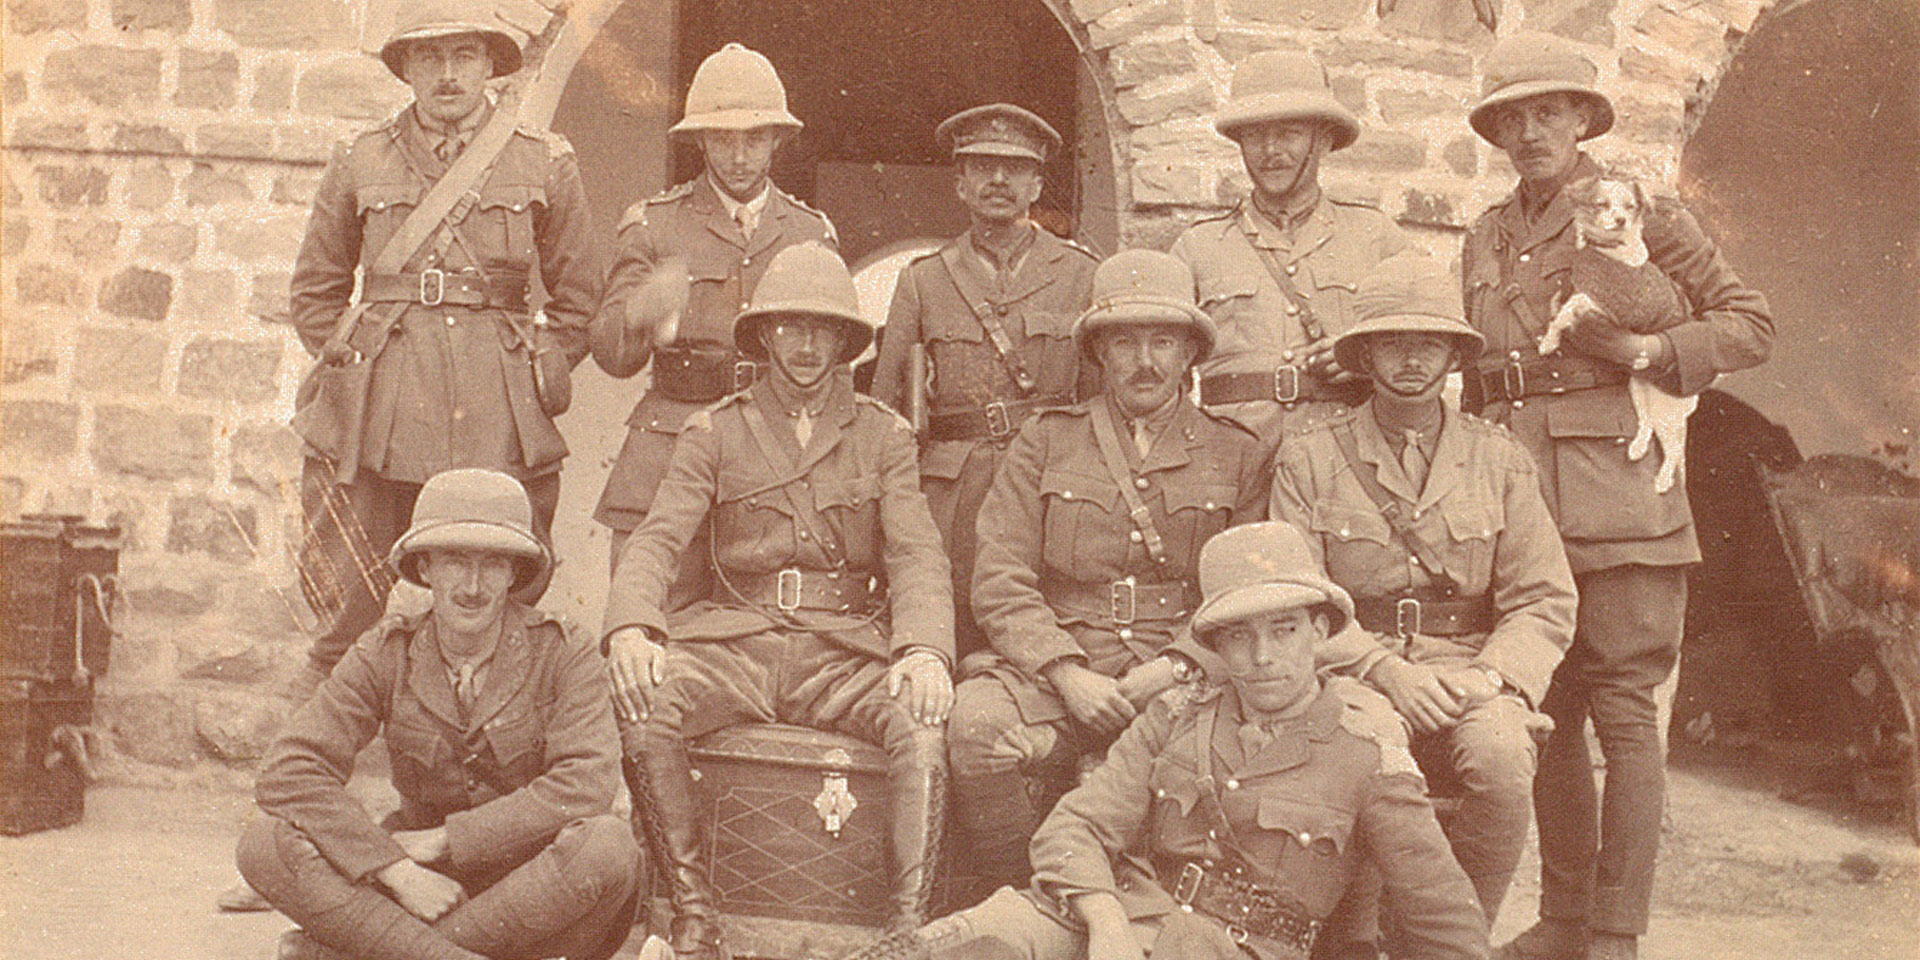 Officers of the 28th Light Cavalry (including Uloth on the right of second row) at Meshed, 1918